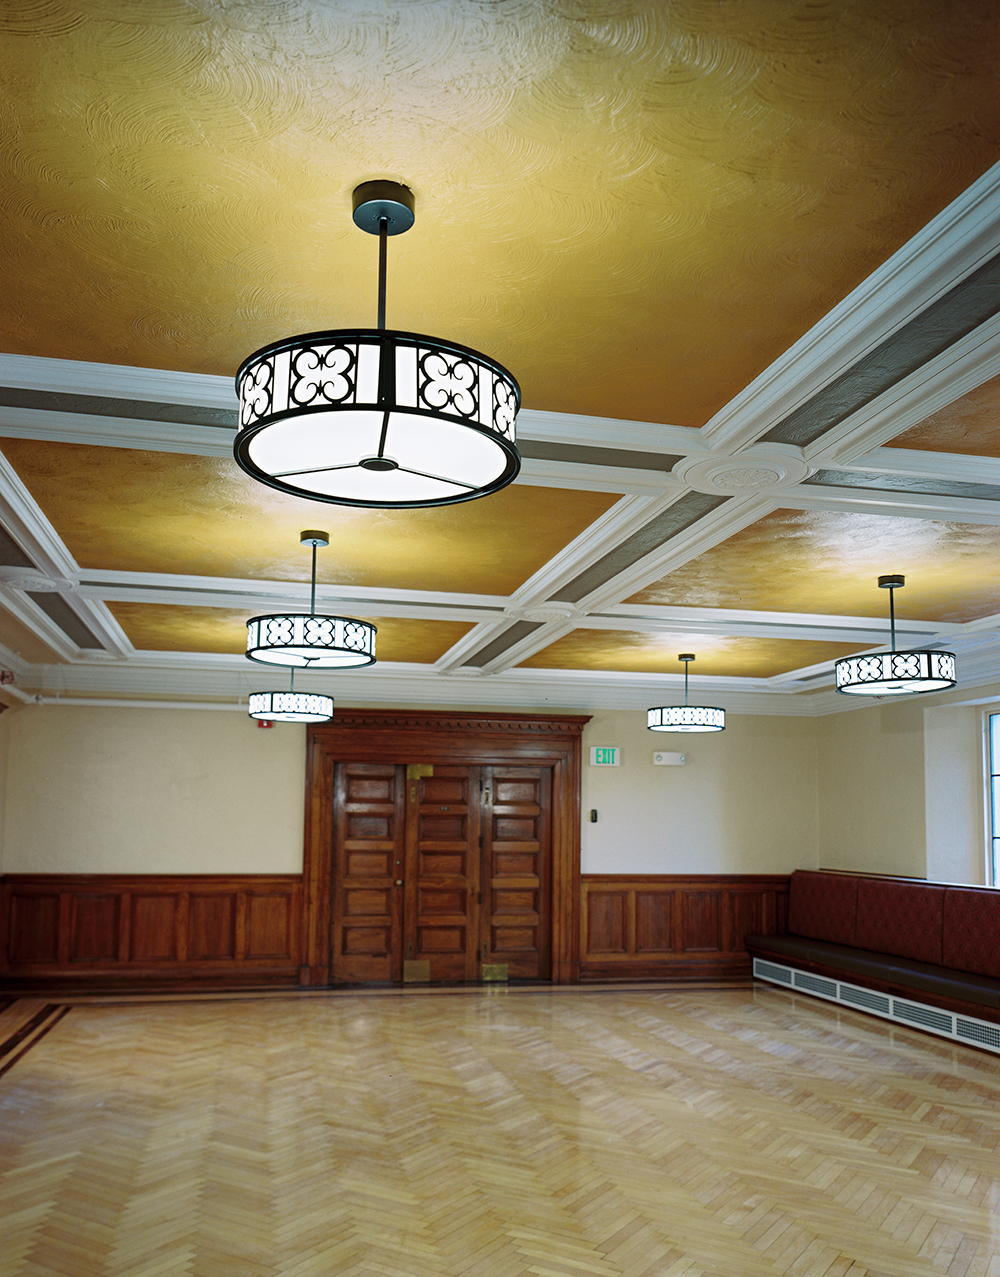 Midland Arts custom light fixtures hung from a classically designed, detailed ceiling, overlooking a polished wood floor.